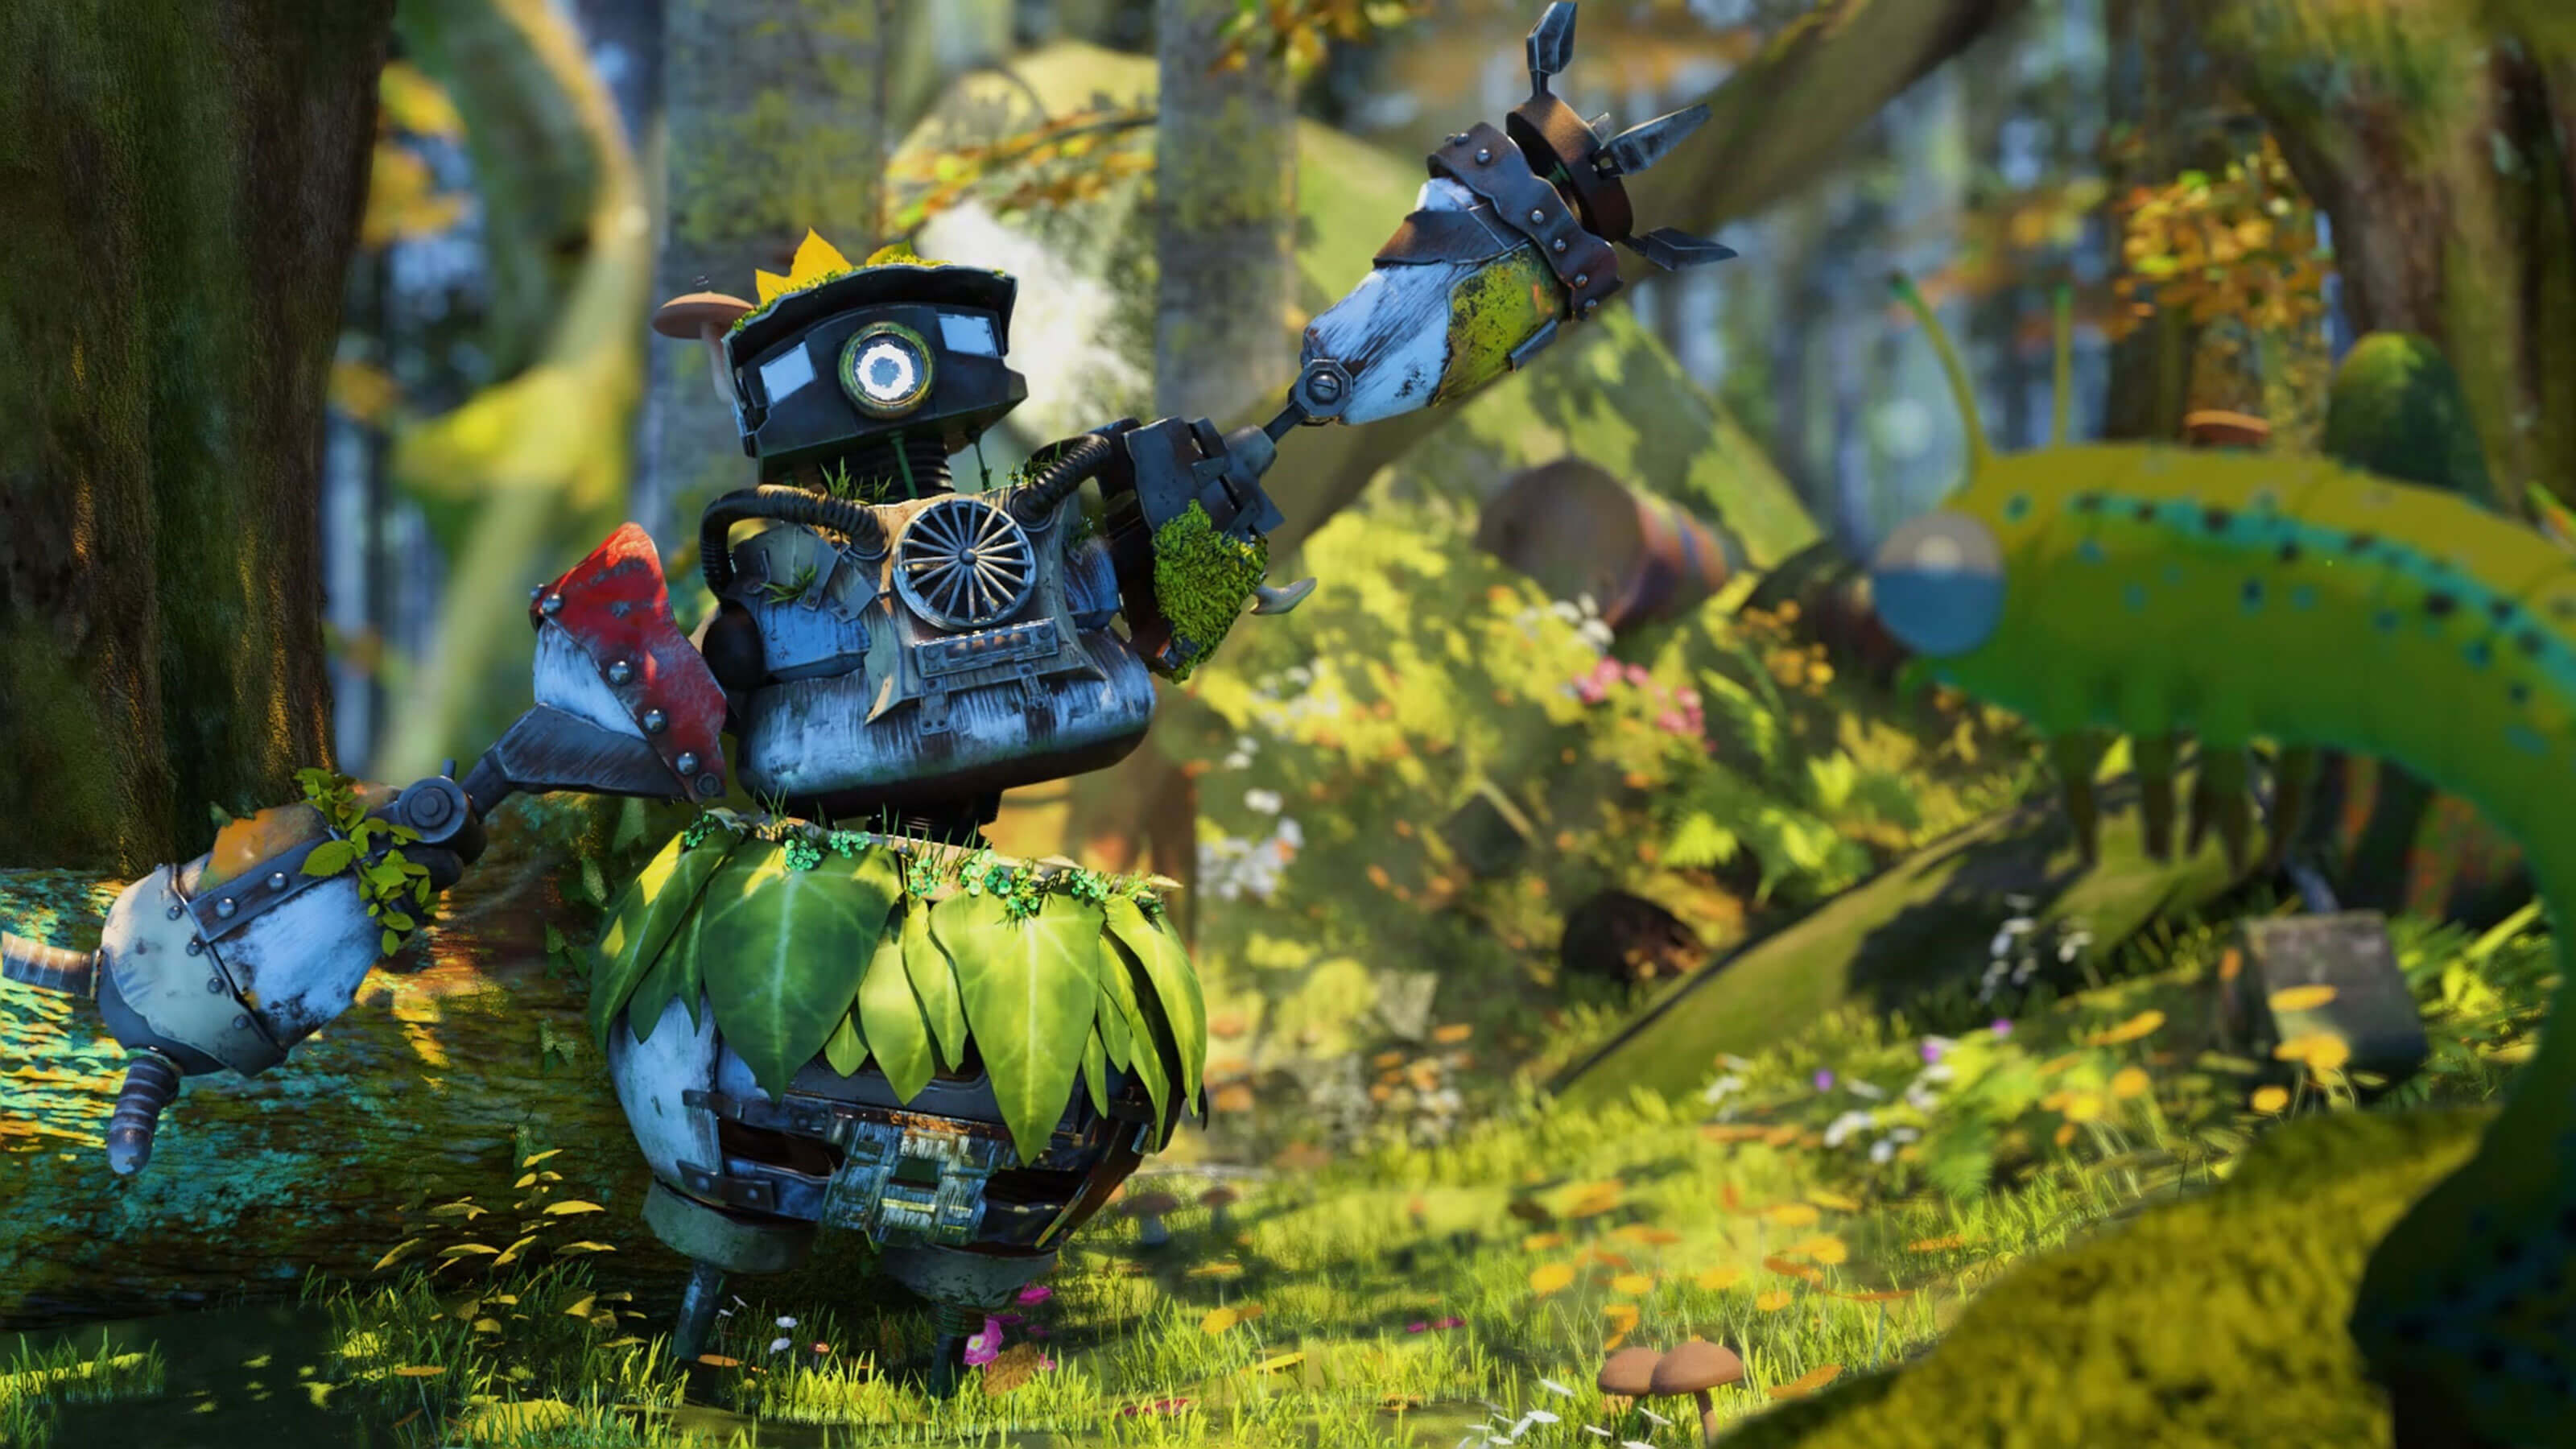 A robot made from various parts and covered in plants and moss poses in a forest.